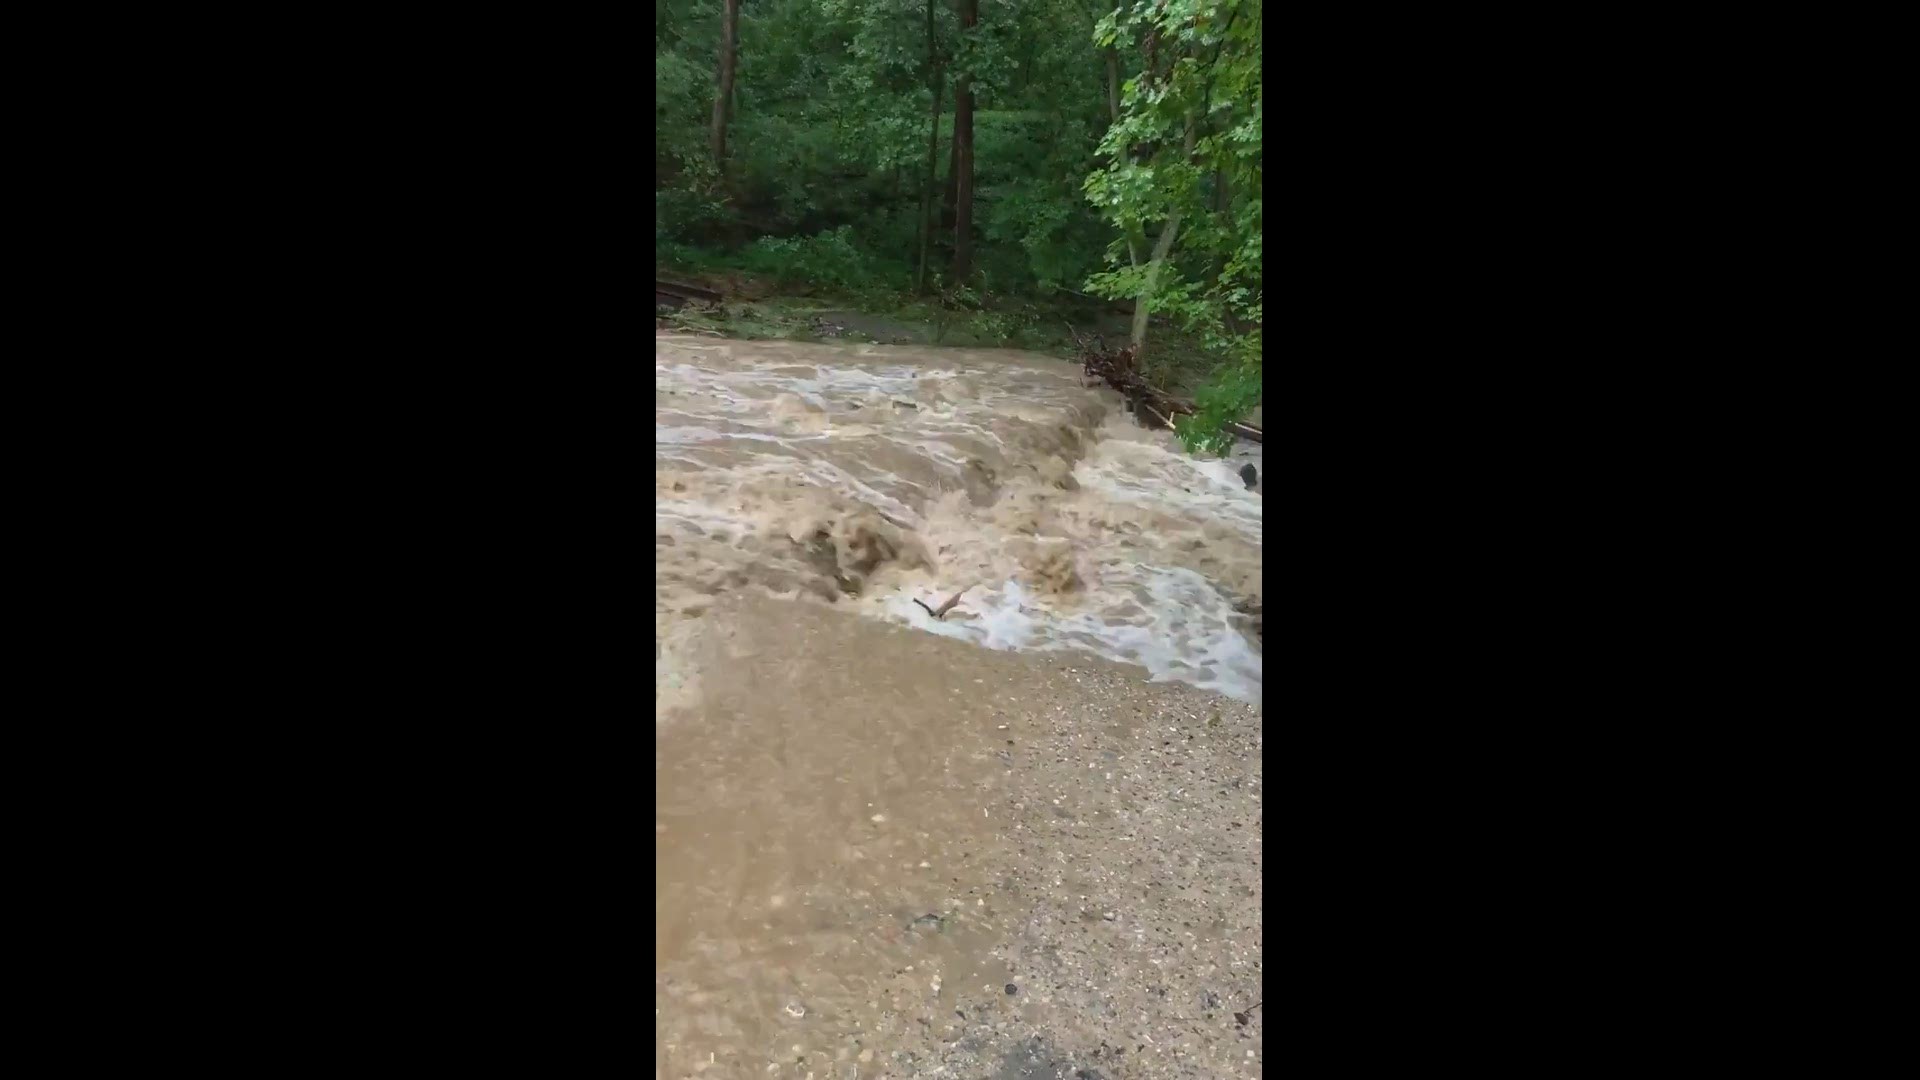 The historic Maryland city experienced severe flood damage in 2016 and 2018, when floodwaters cascaded down Main Street into the Patapsco River.